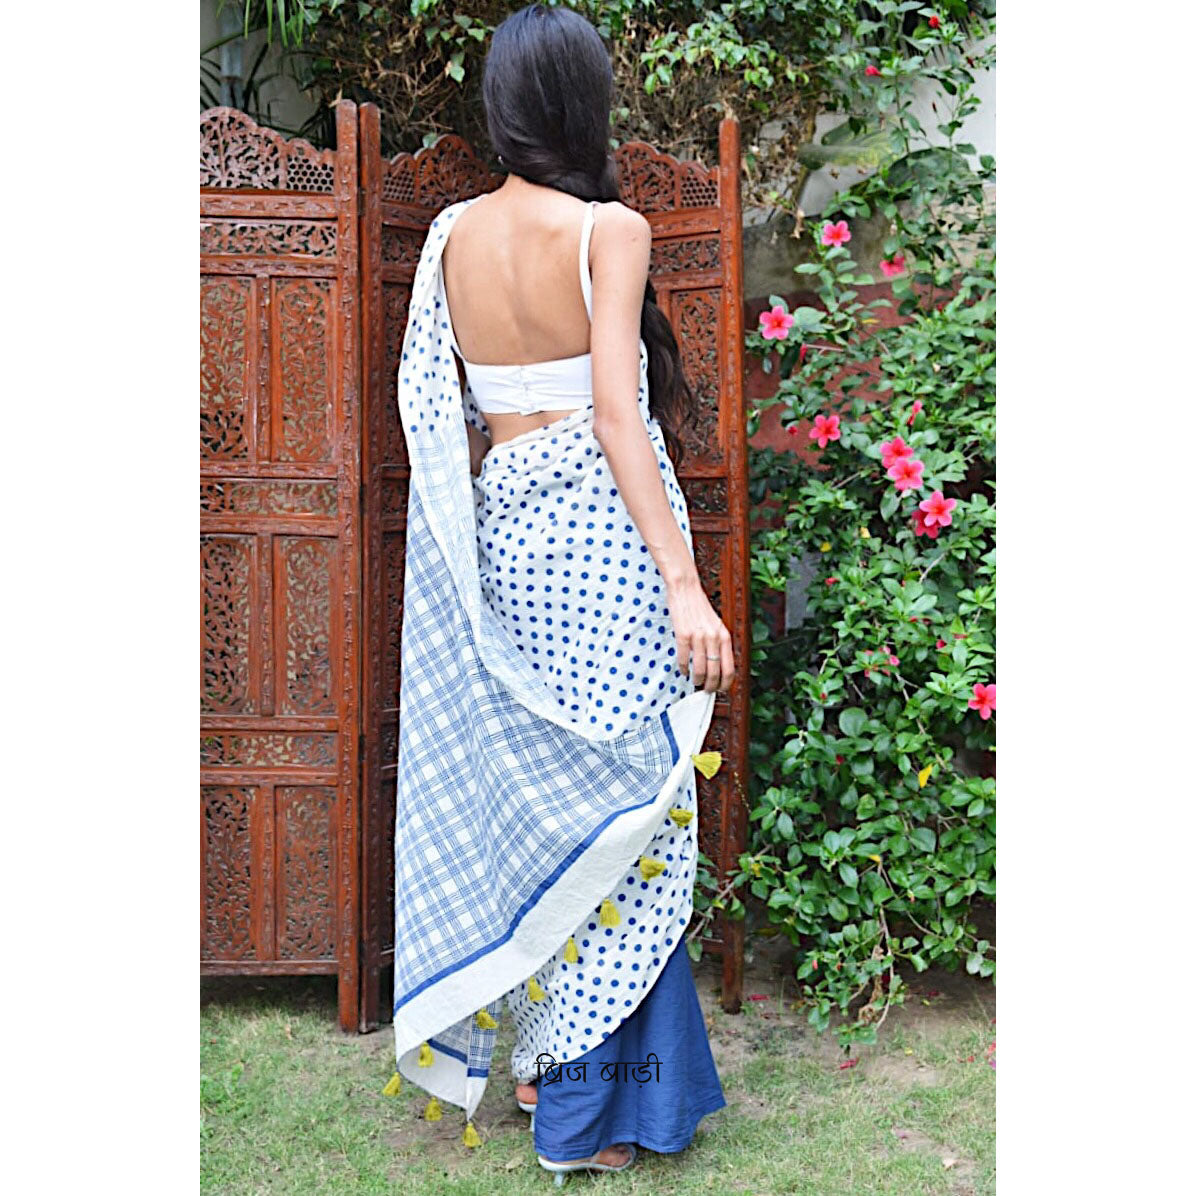 Hand Block Printed cotton mulmul yellow saree for festivities, office, and daily. All day comfort and style